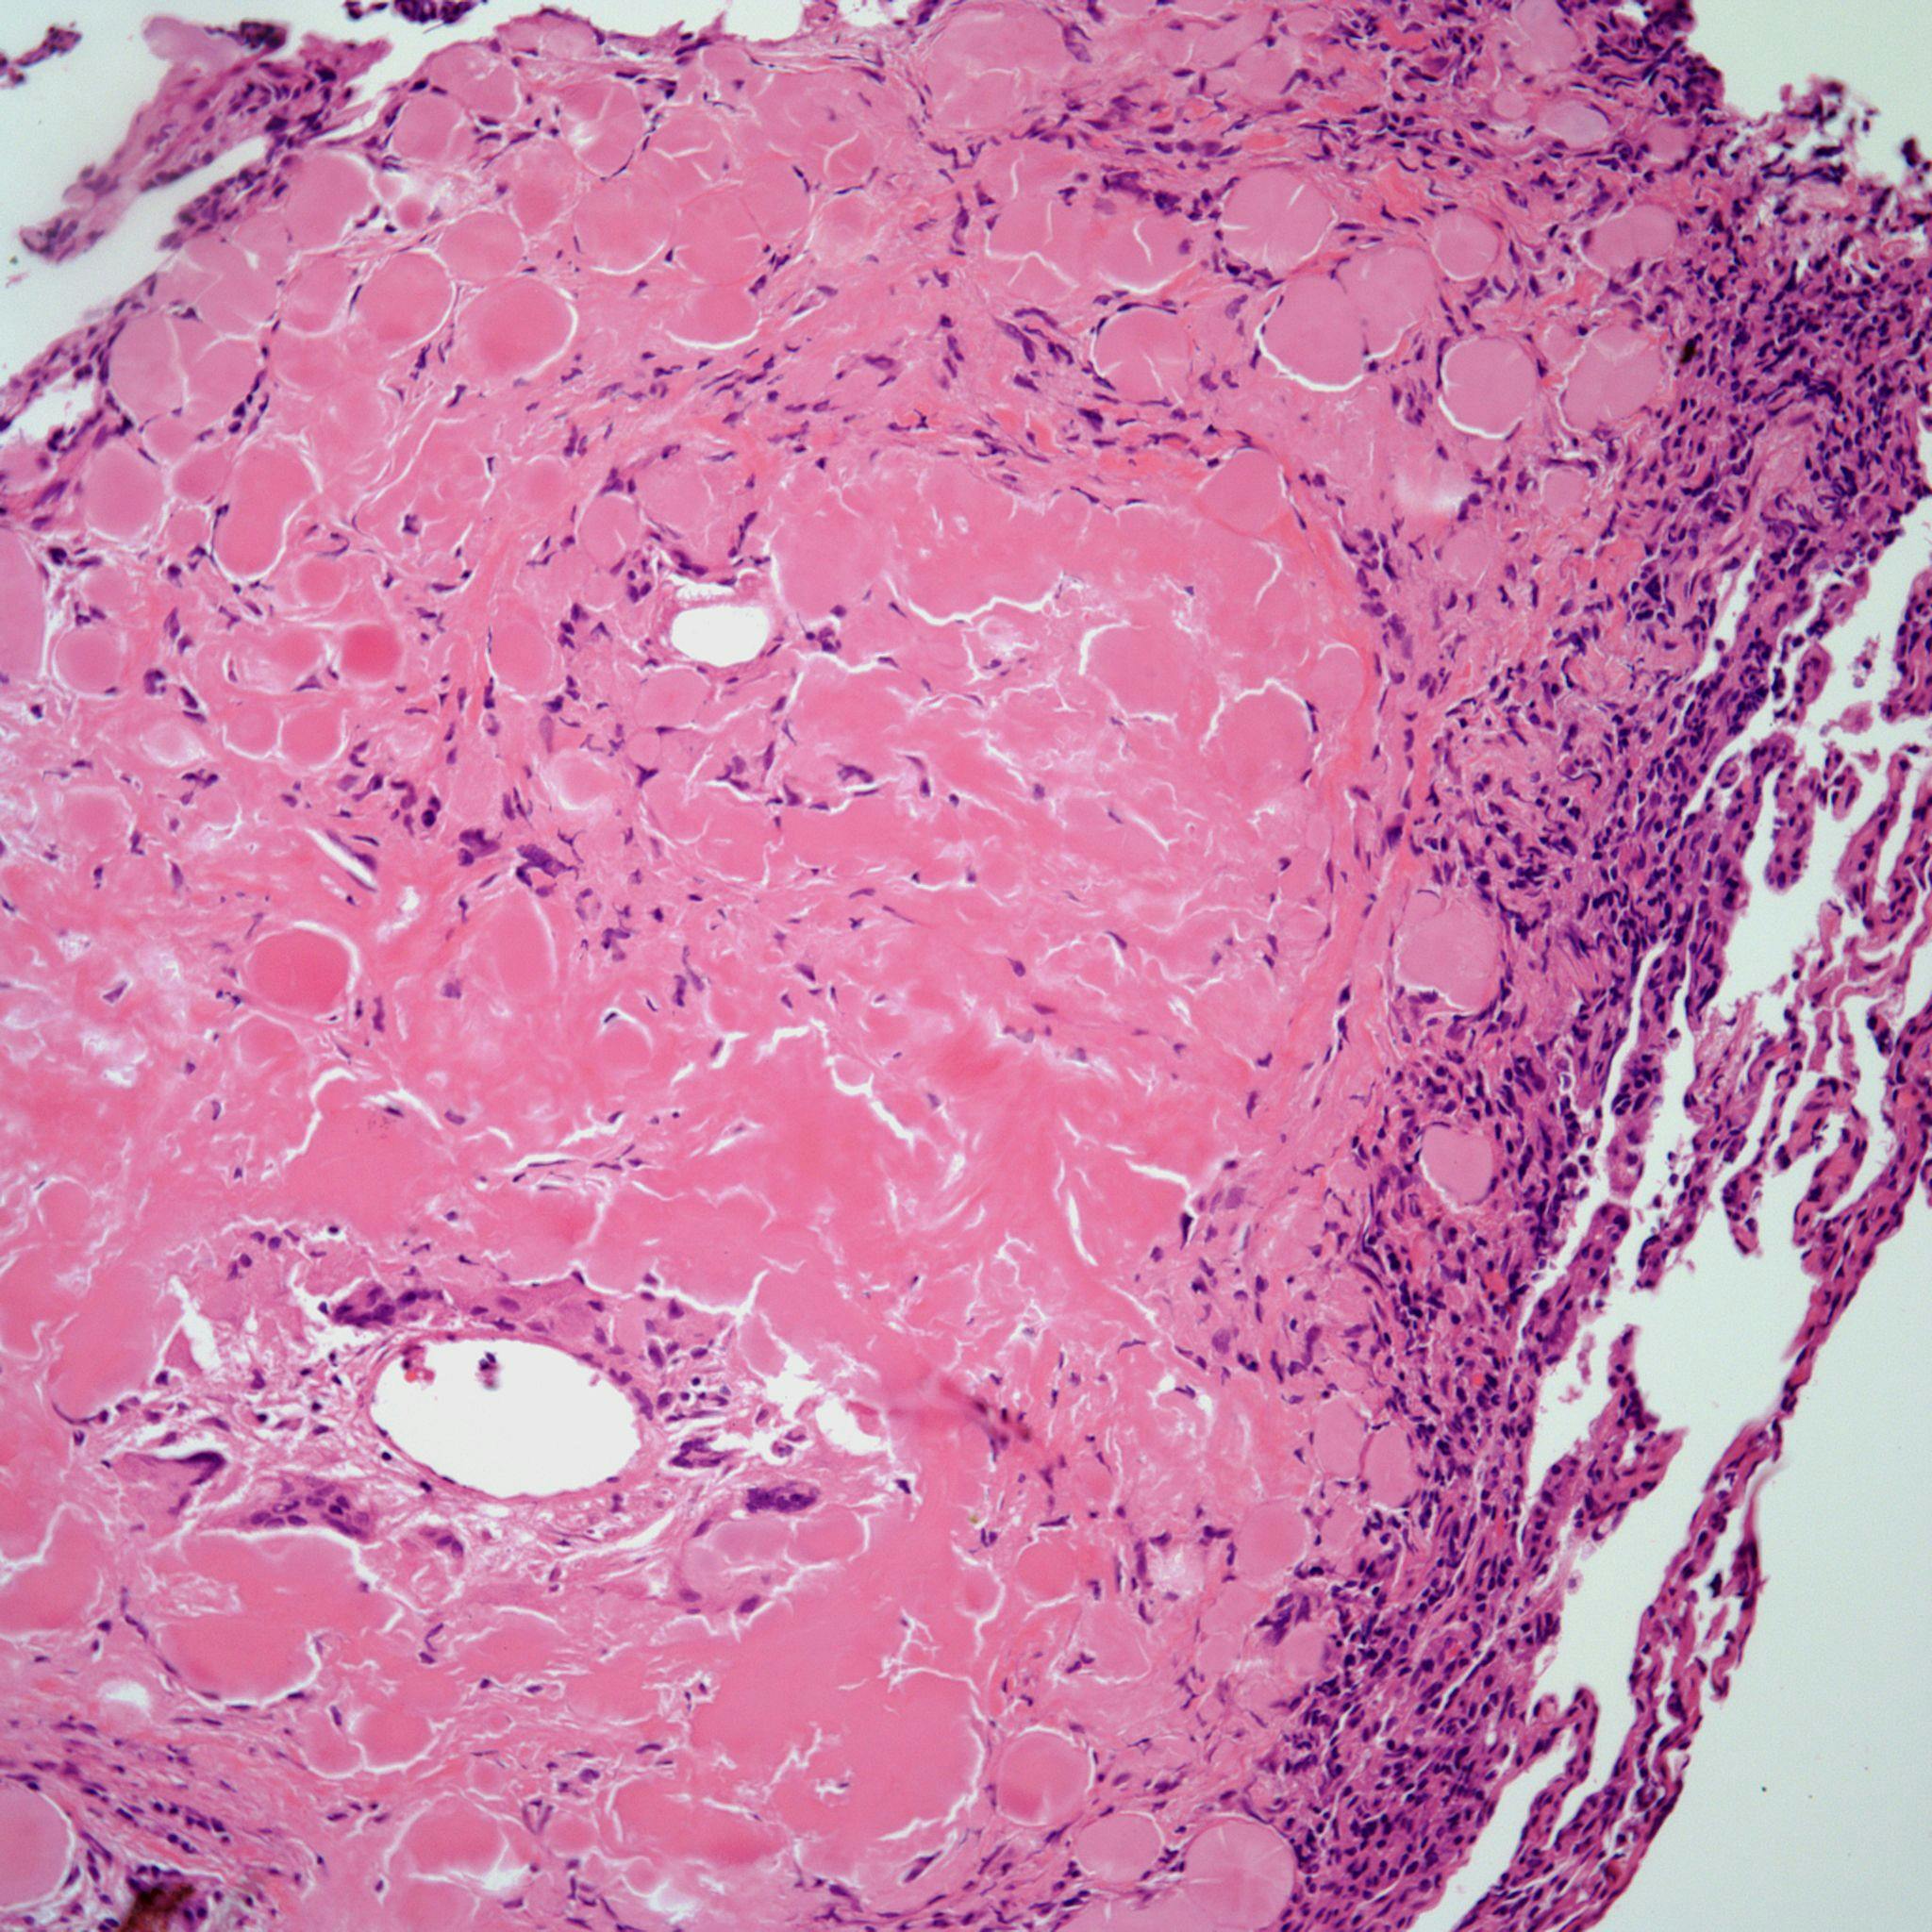 A 53-Year-Old Man With a Cough, Chest Pain, and Dyspnea 